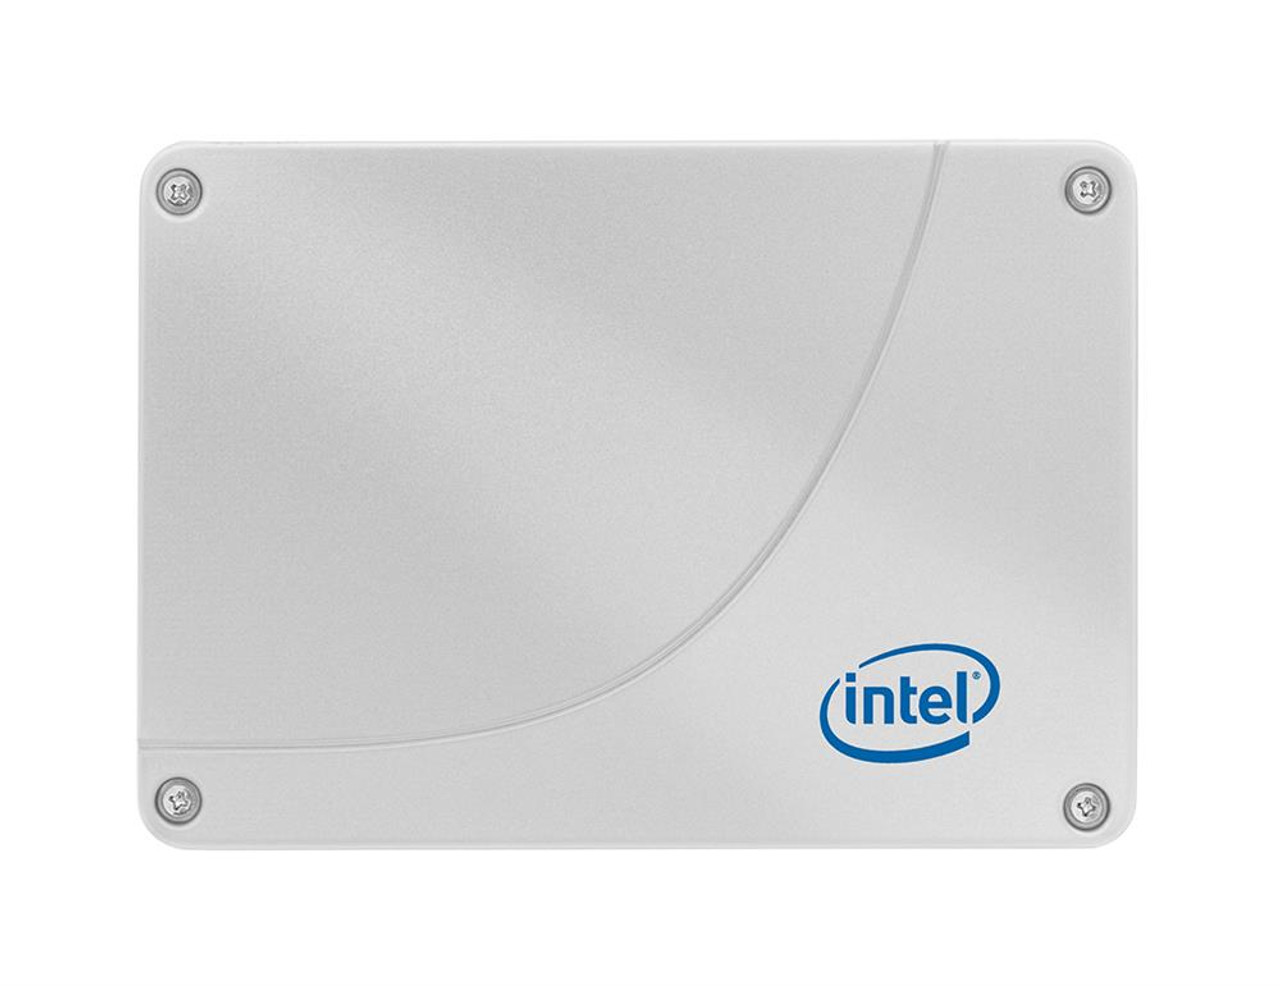 1356231 Intel 520 Series 480GB MLC SATA 6Gbps (AES-128) 2.5-inch Internal Solid State Drive (SSD)